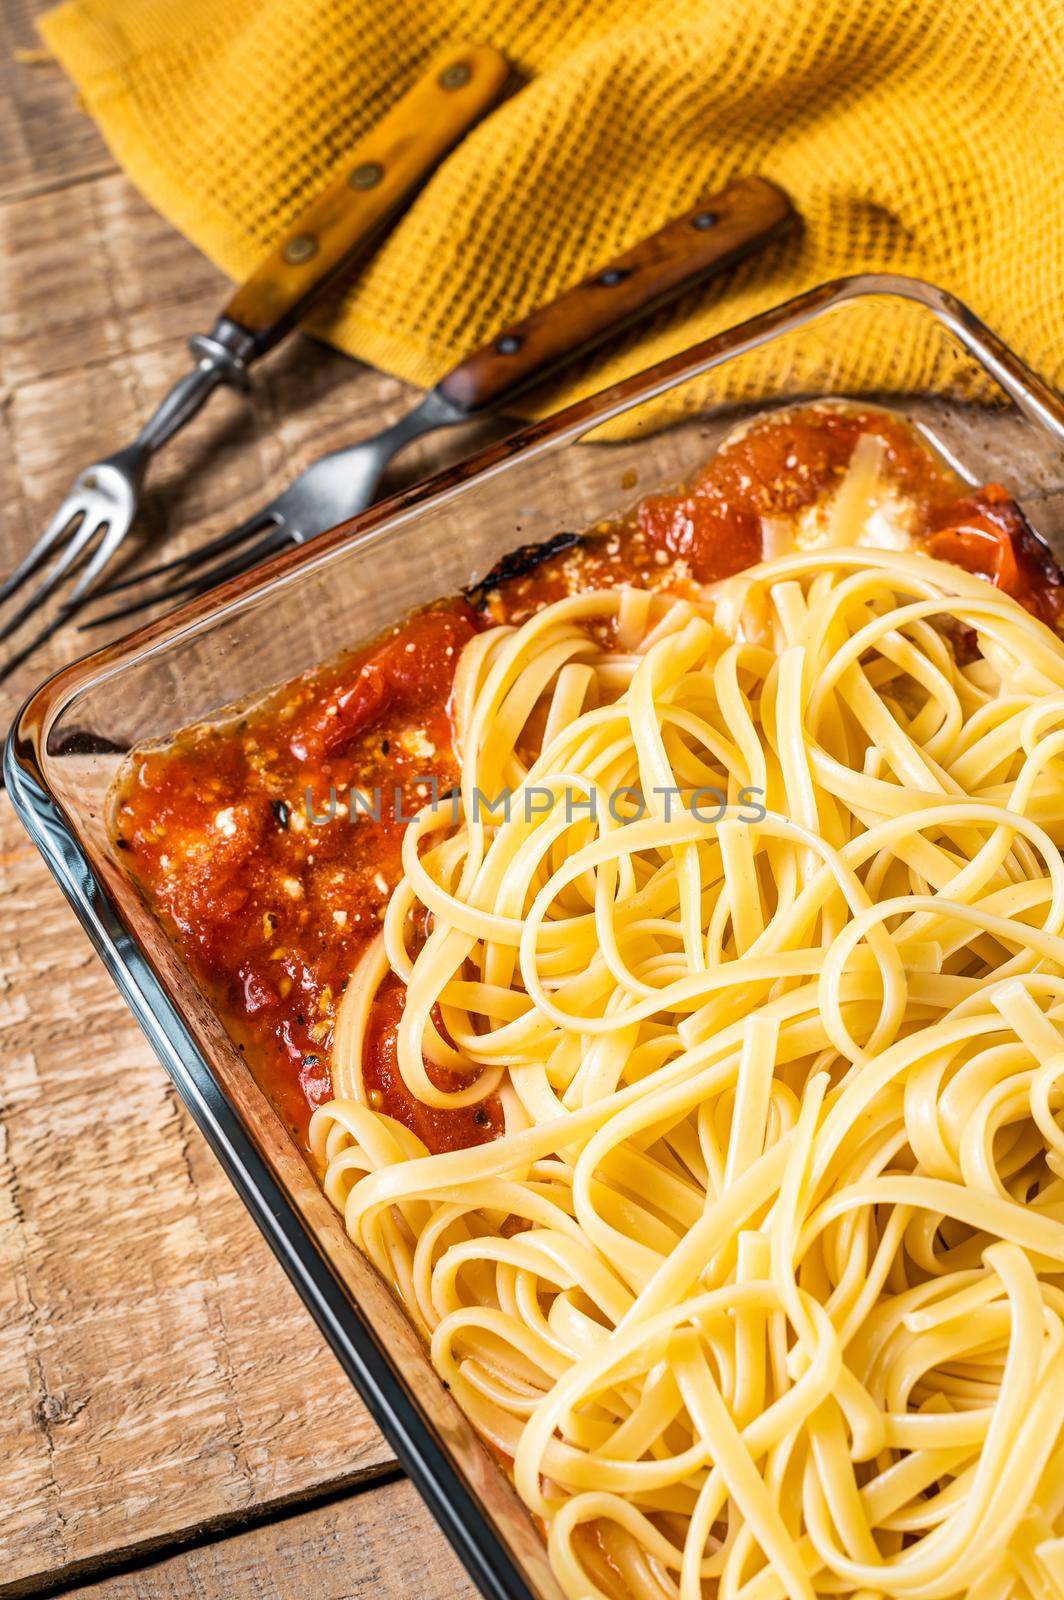 Oven roasted feta pasta with tomatoes in baking dish. Wooden background. Top view by Composter